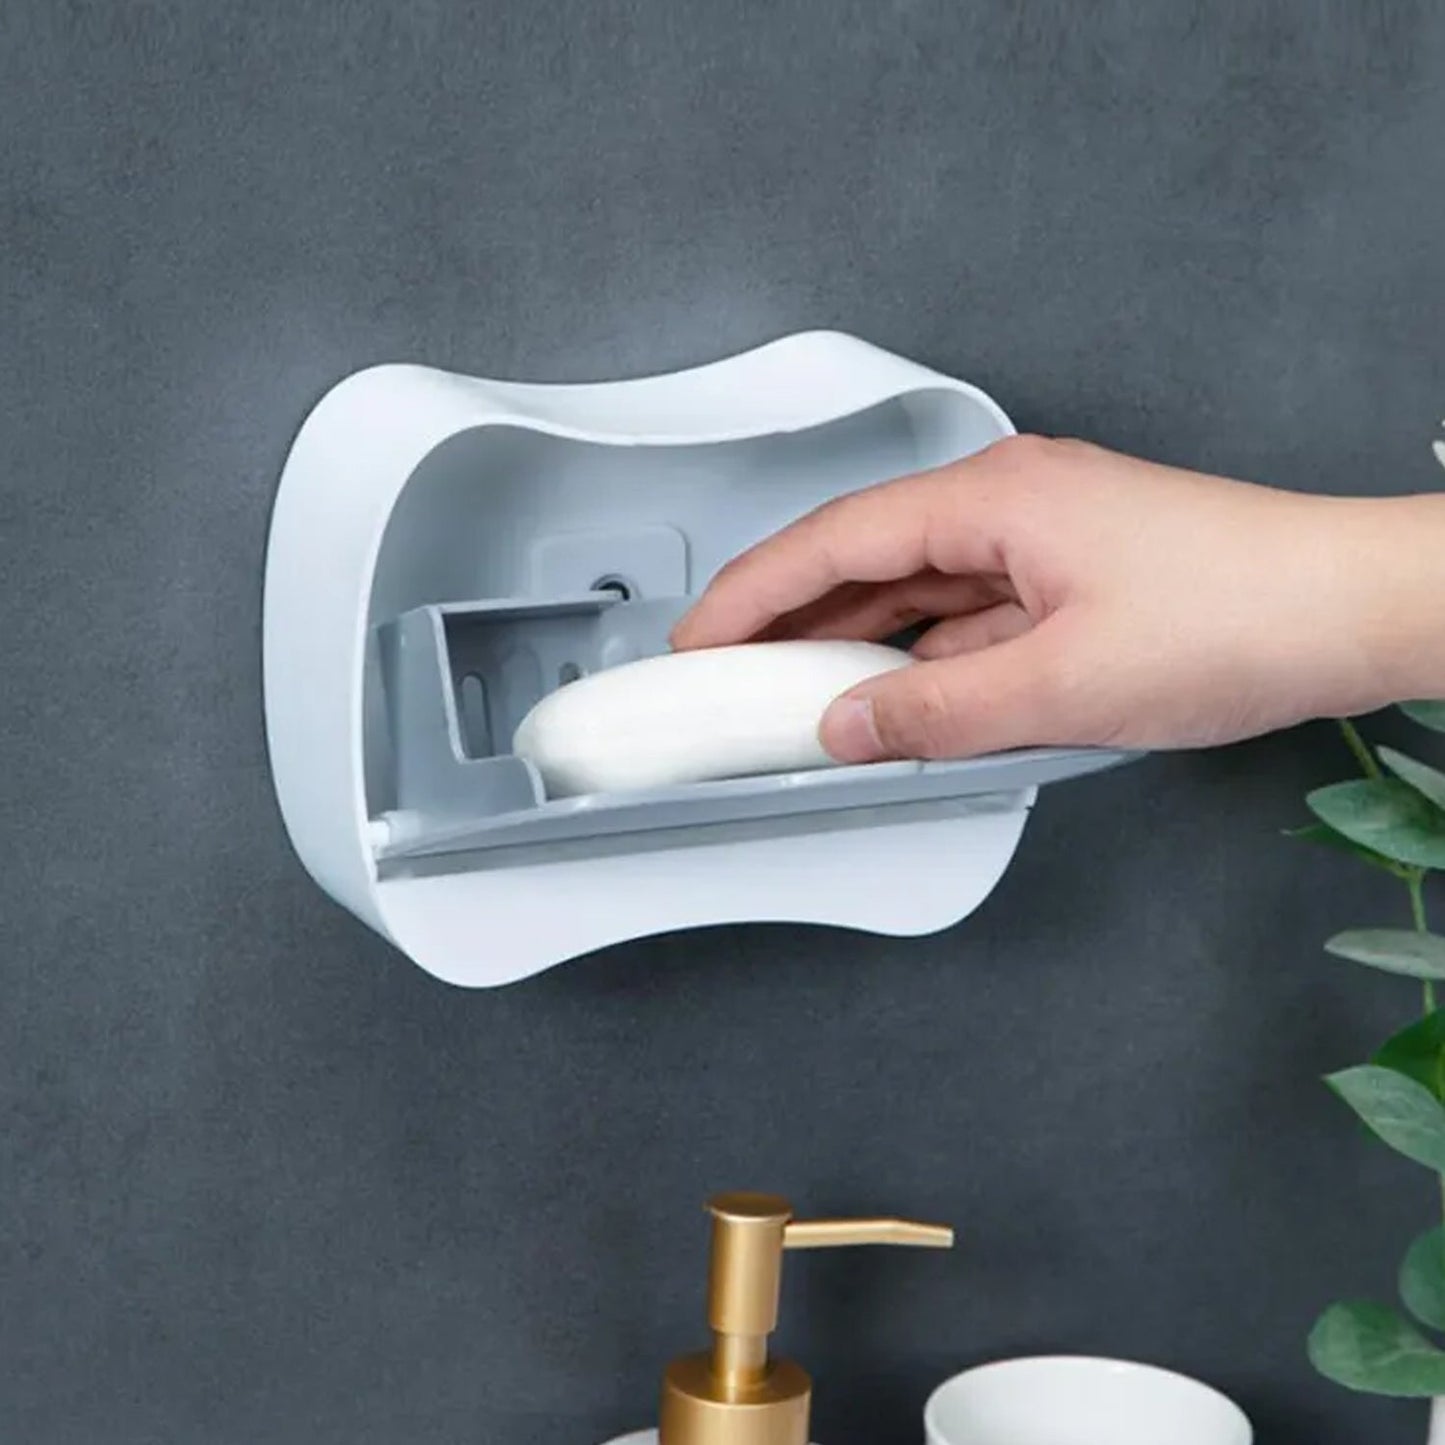 4336 Soap Holder Travel Business Travel Hotel Portable Wall-mounted Soap Box Bathroom Toilet Punch-free Flip-type Drain Soap Box, Waterproof Space Saving (1 Pc)